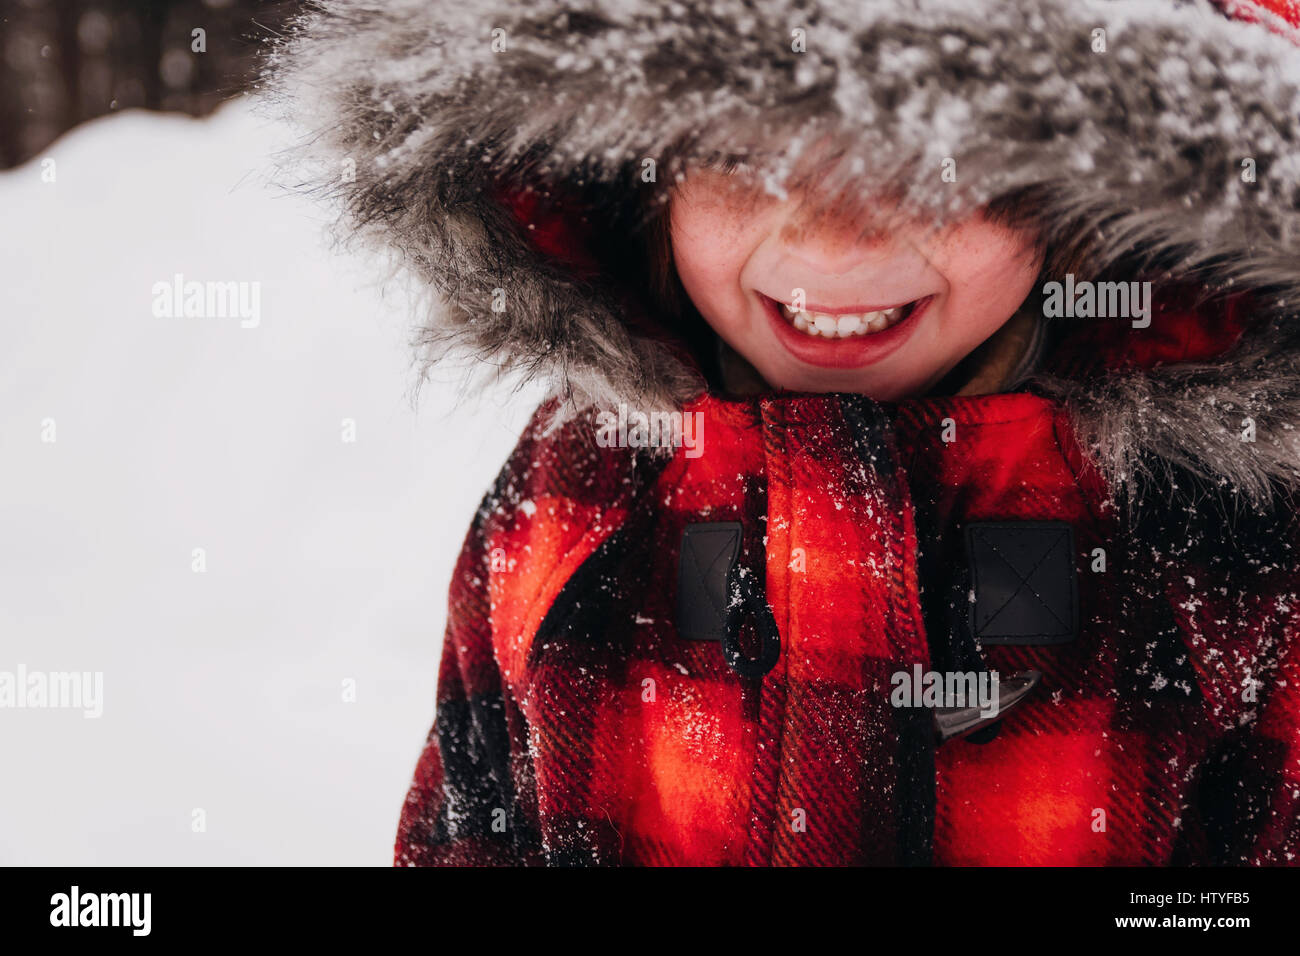 Portrait of a smiling girl in hooded parka Stock Photo